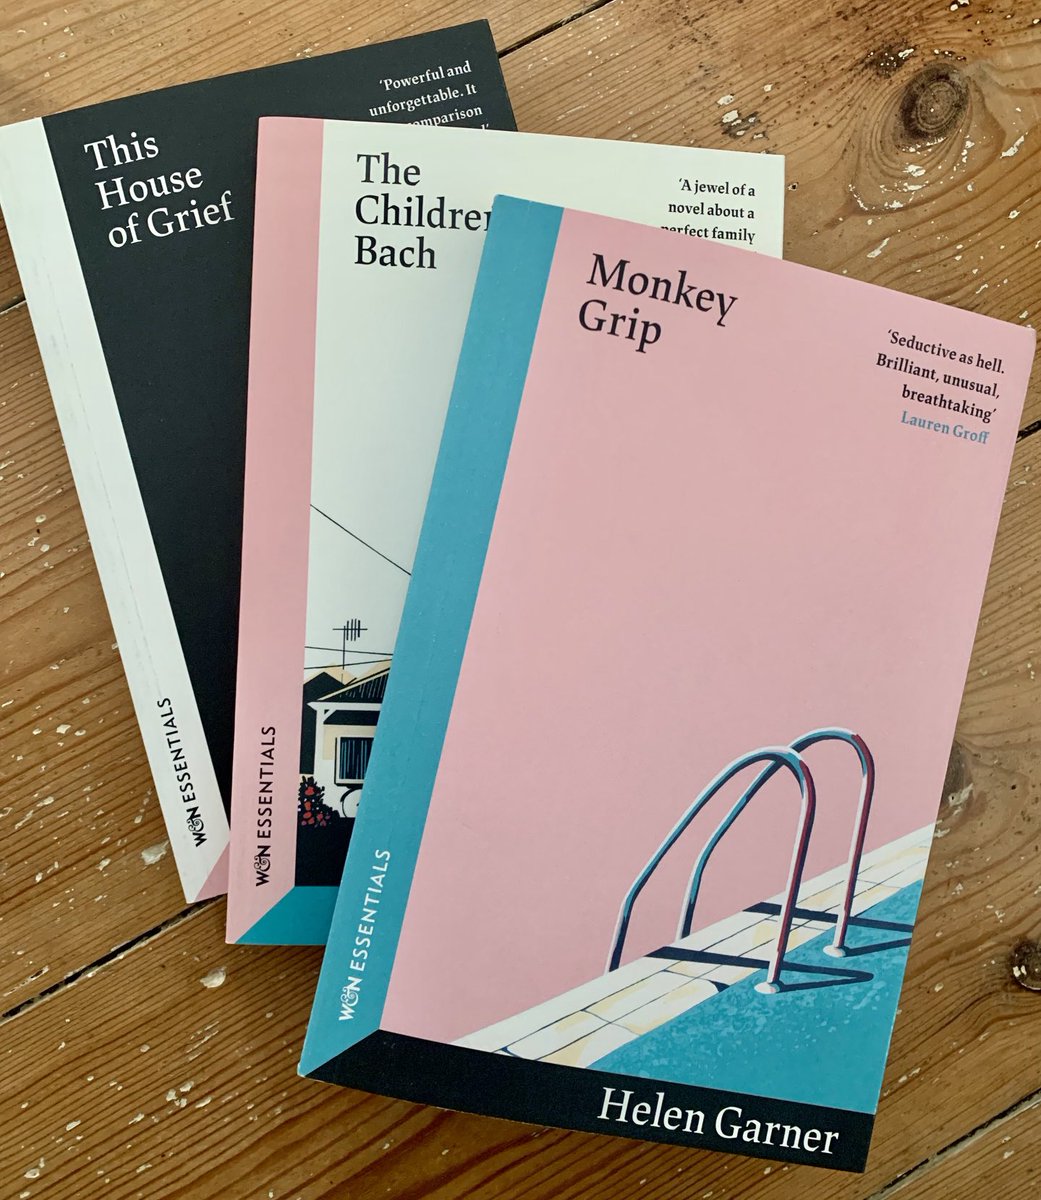 📖 Gorgeous new editions of #HelenGarner classics from ⁦@wnbooks⁩ 🙏 ⁦@letticefranklin⁩ … with new introductions by David Nicholls, Rachel Cooke, & Lauren Groff